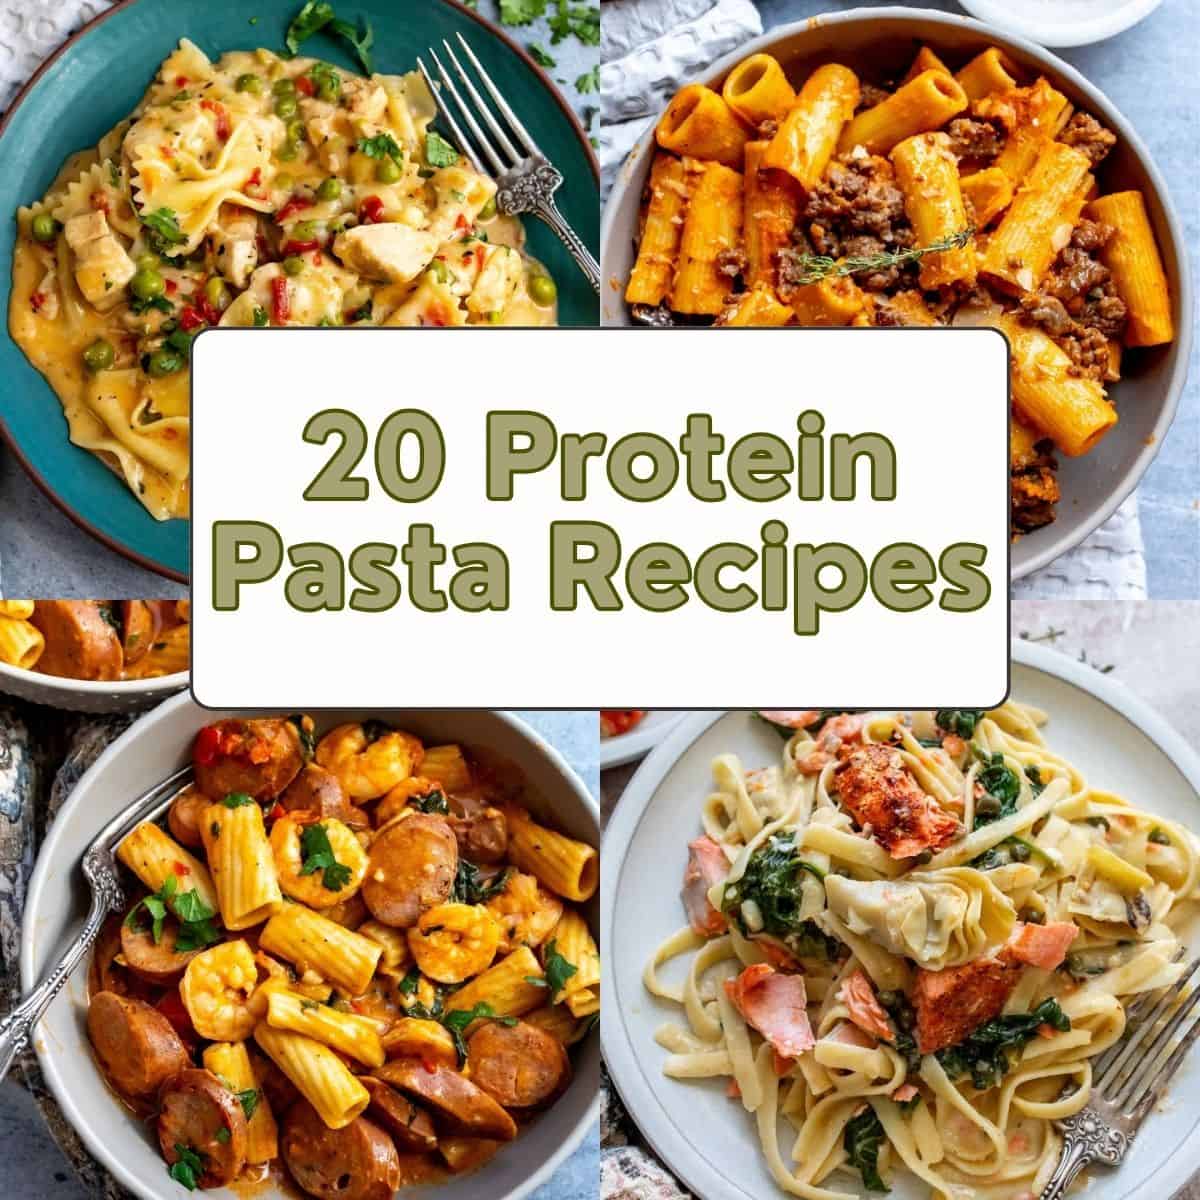 A collage of four protein pasta receipes with the header "20 Protein Pasta Recipes" in the middle.